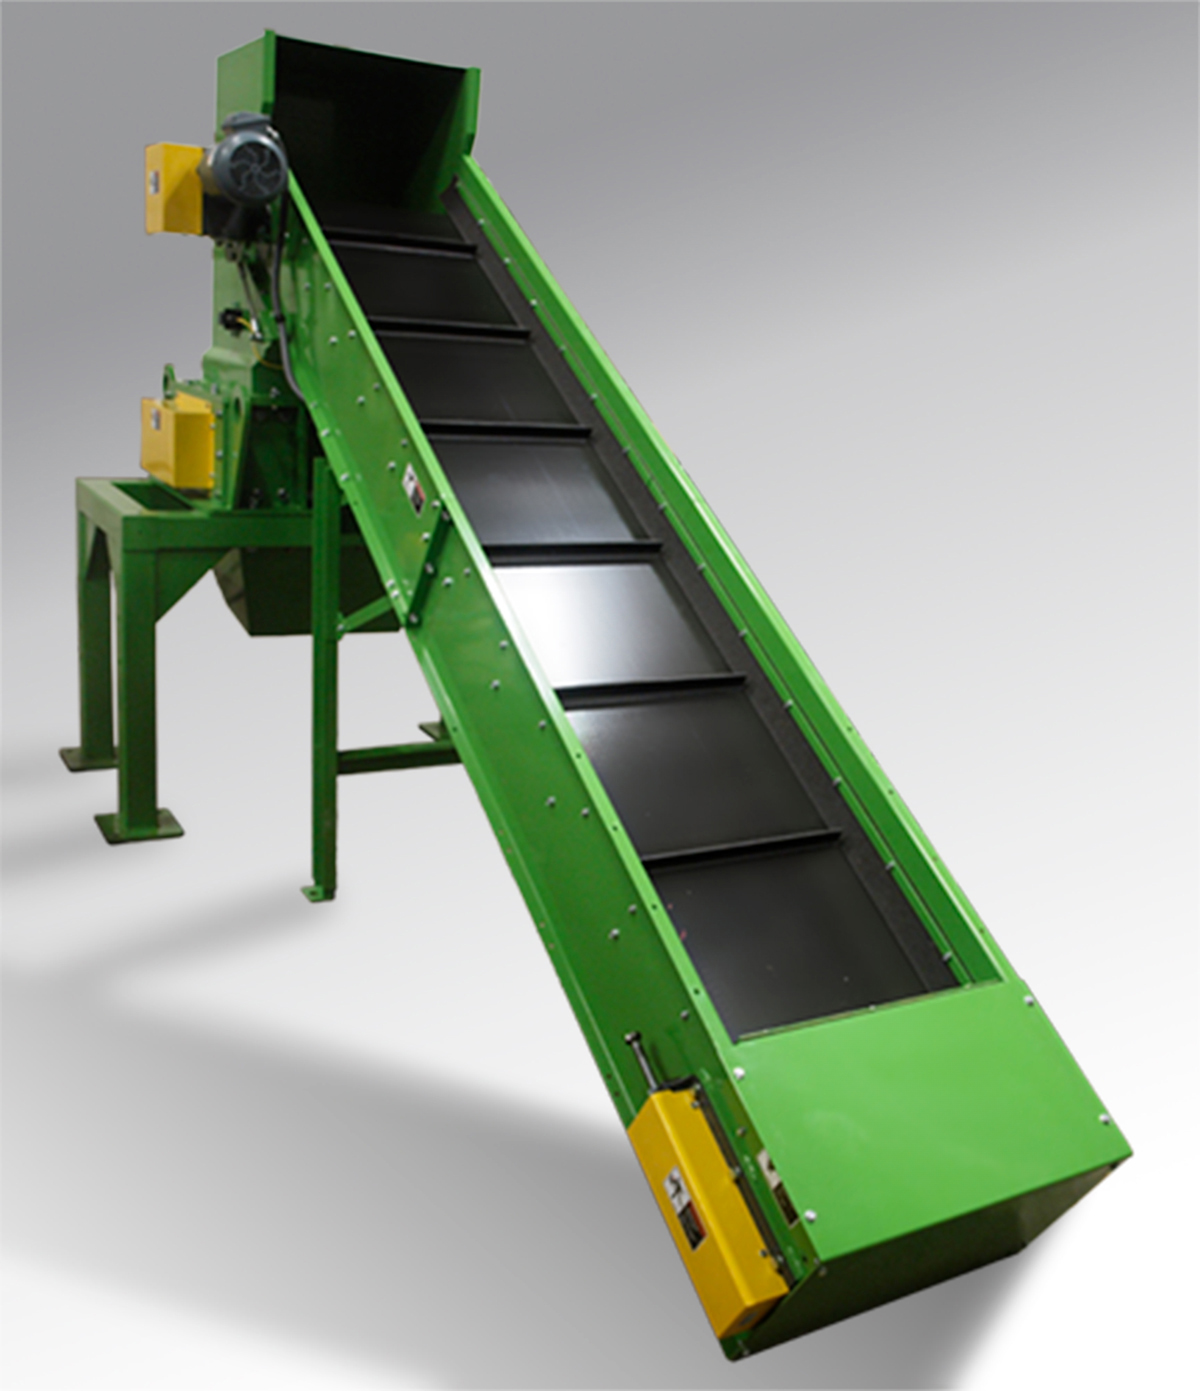 Infeed/outfeed conveyor belt for cannabis shredding systems